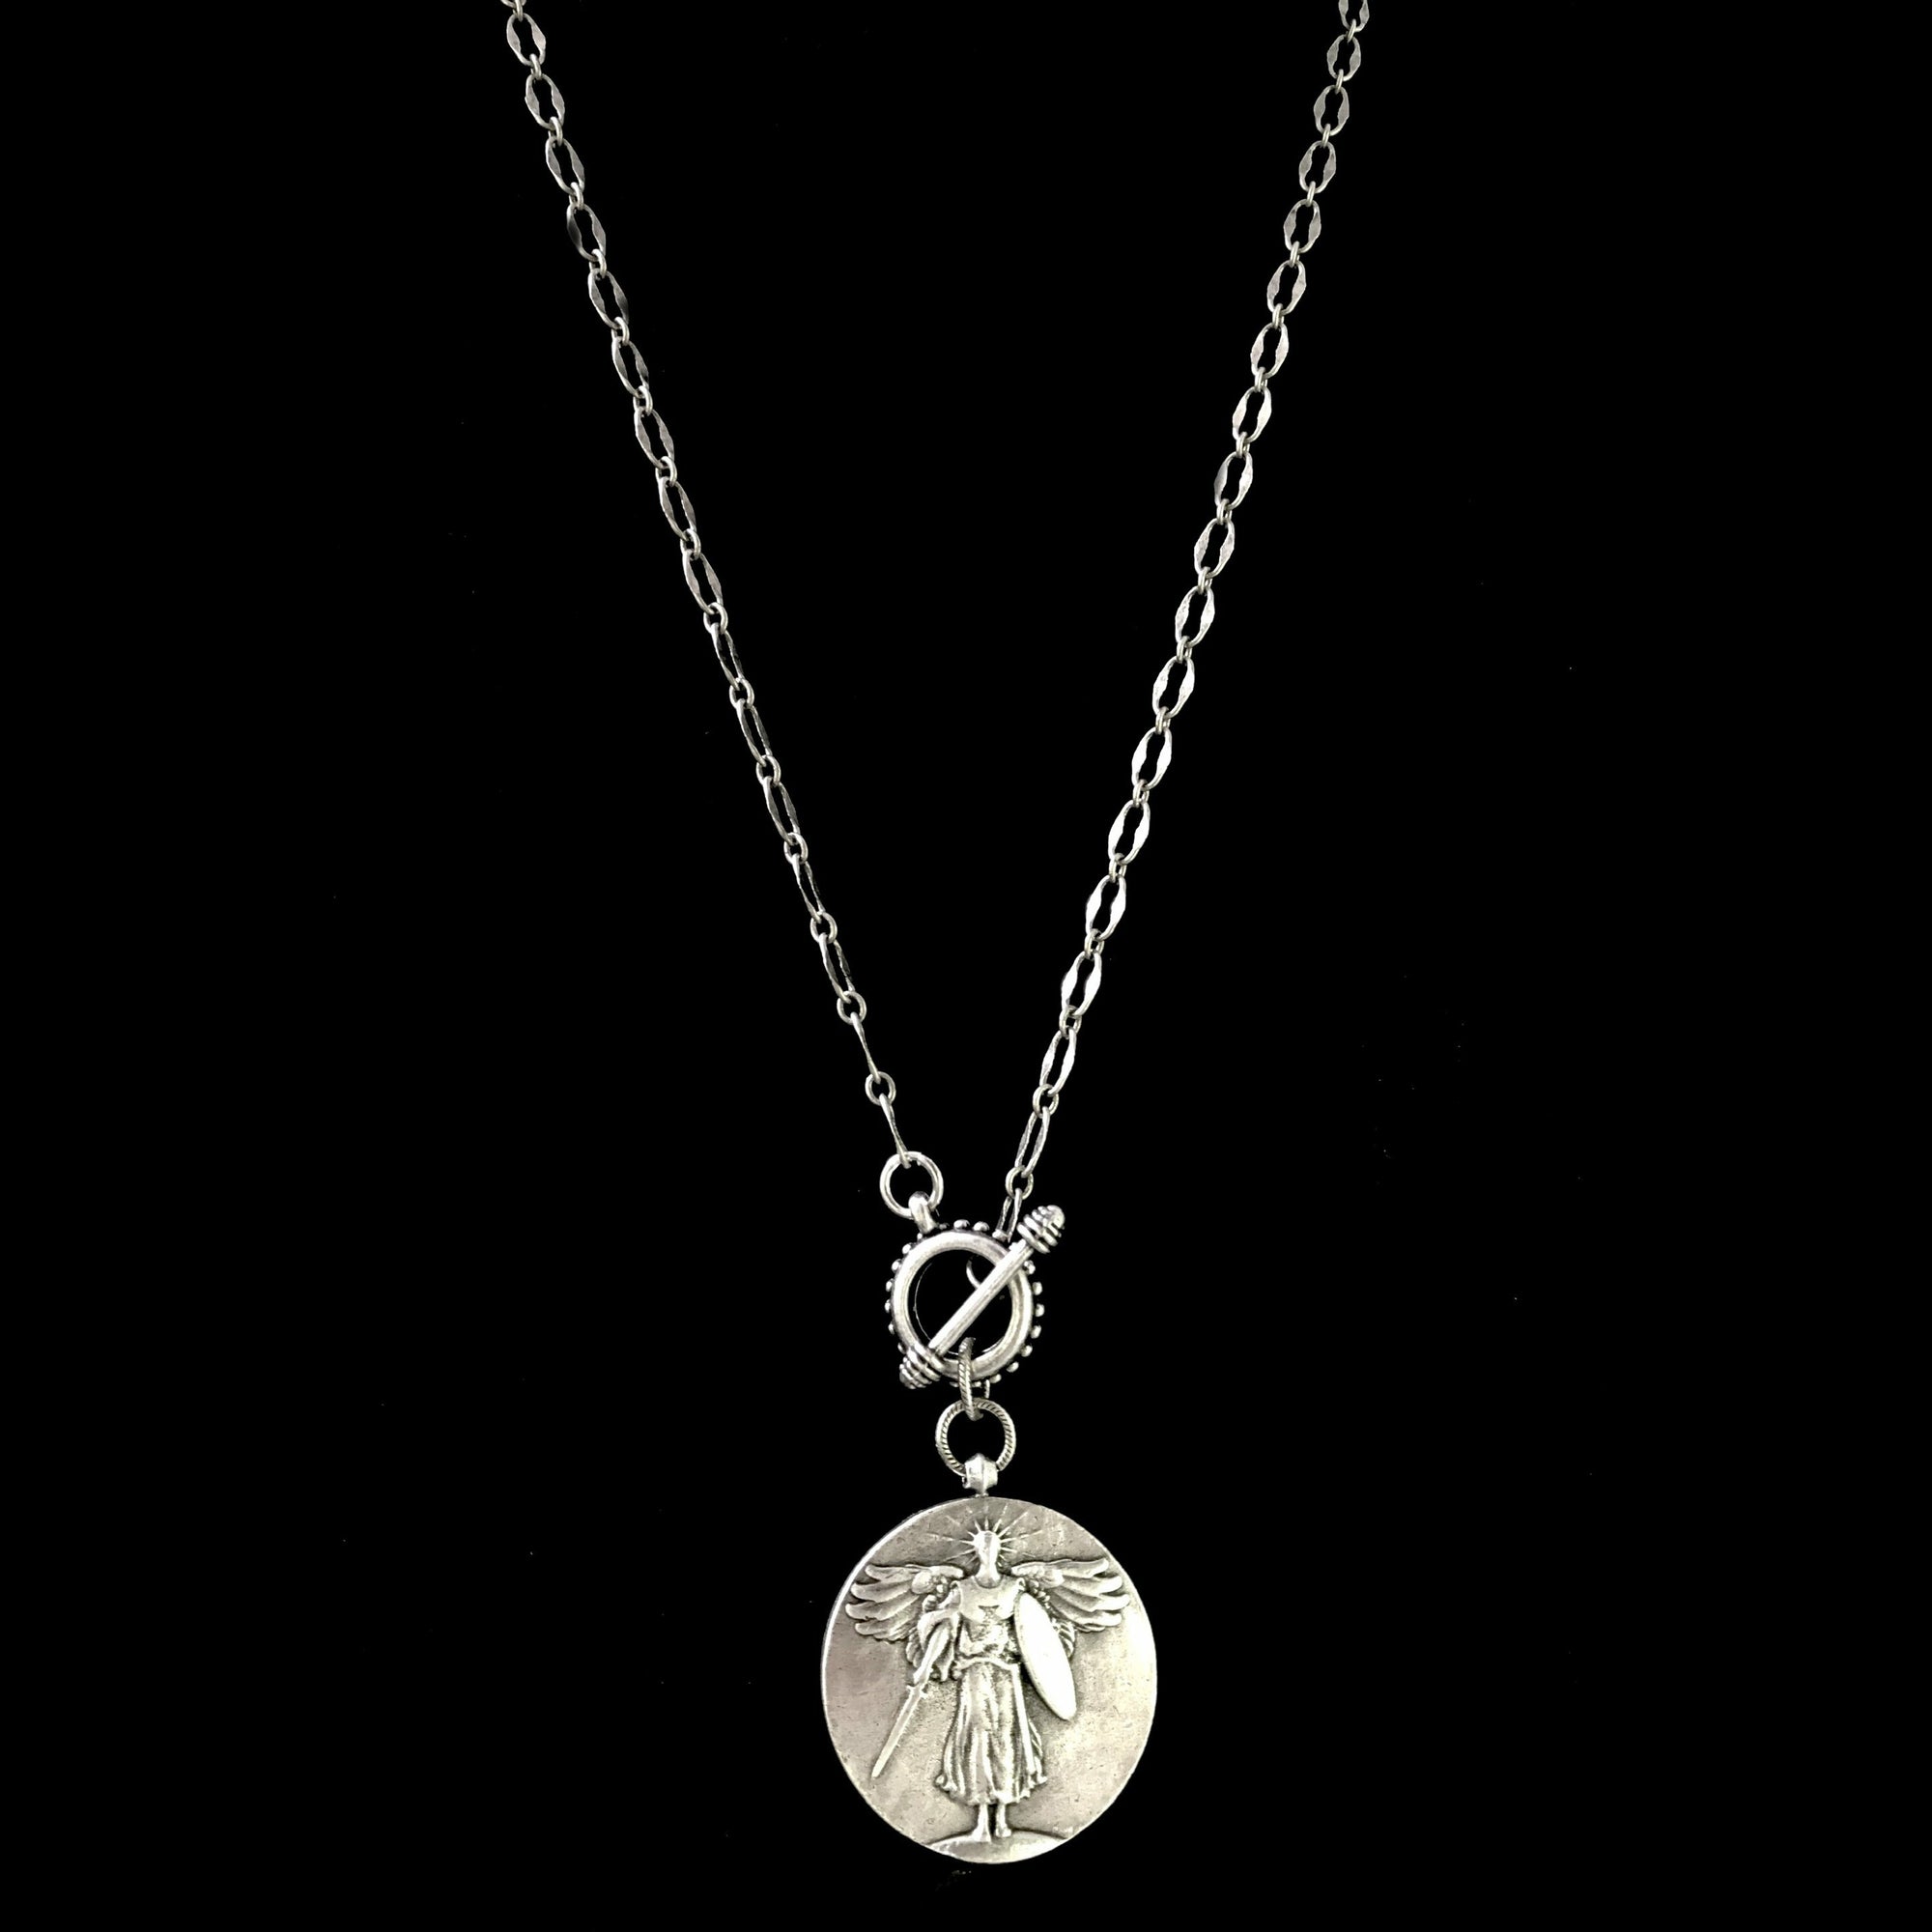 Saint  Michael  Wisdom  Chain Necklace by Whispering Goddess - Silver